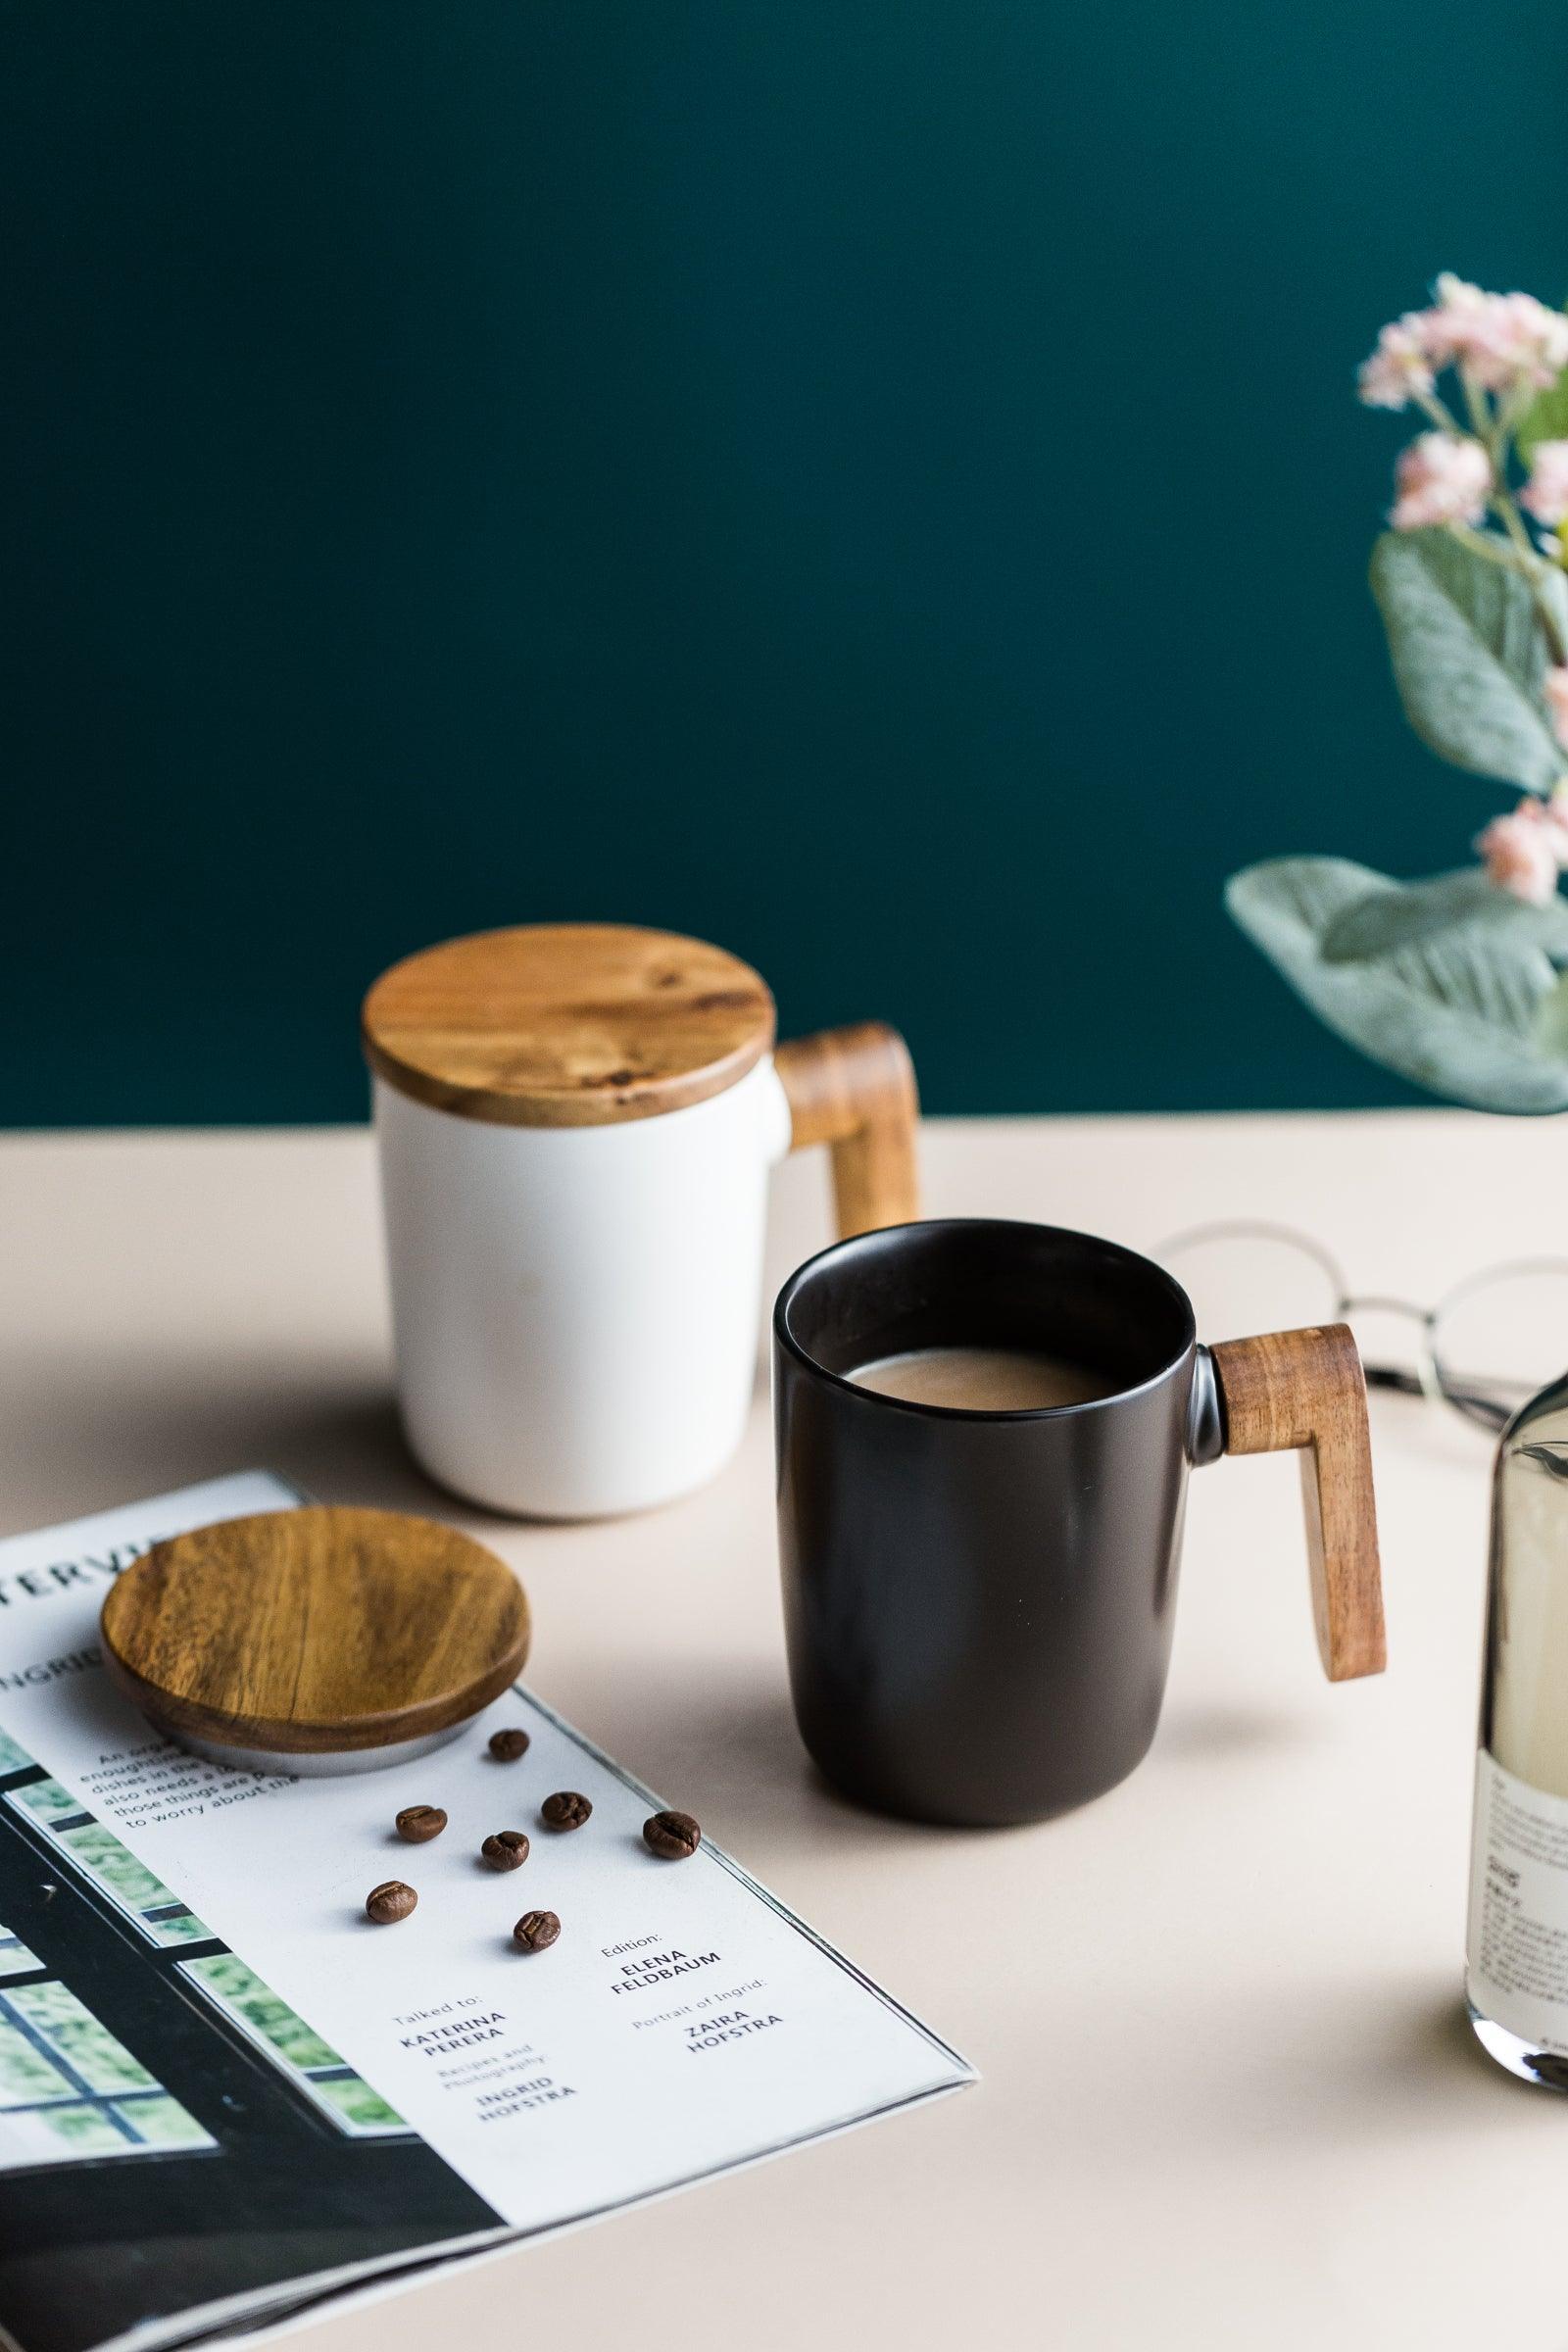 Ceramic Mug with Wooden Lid and Handle